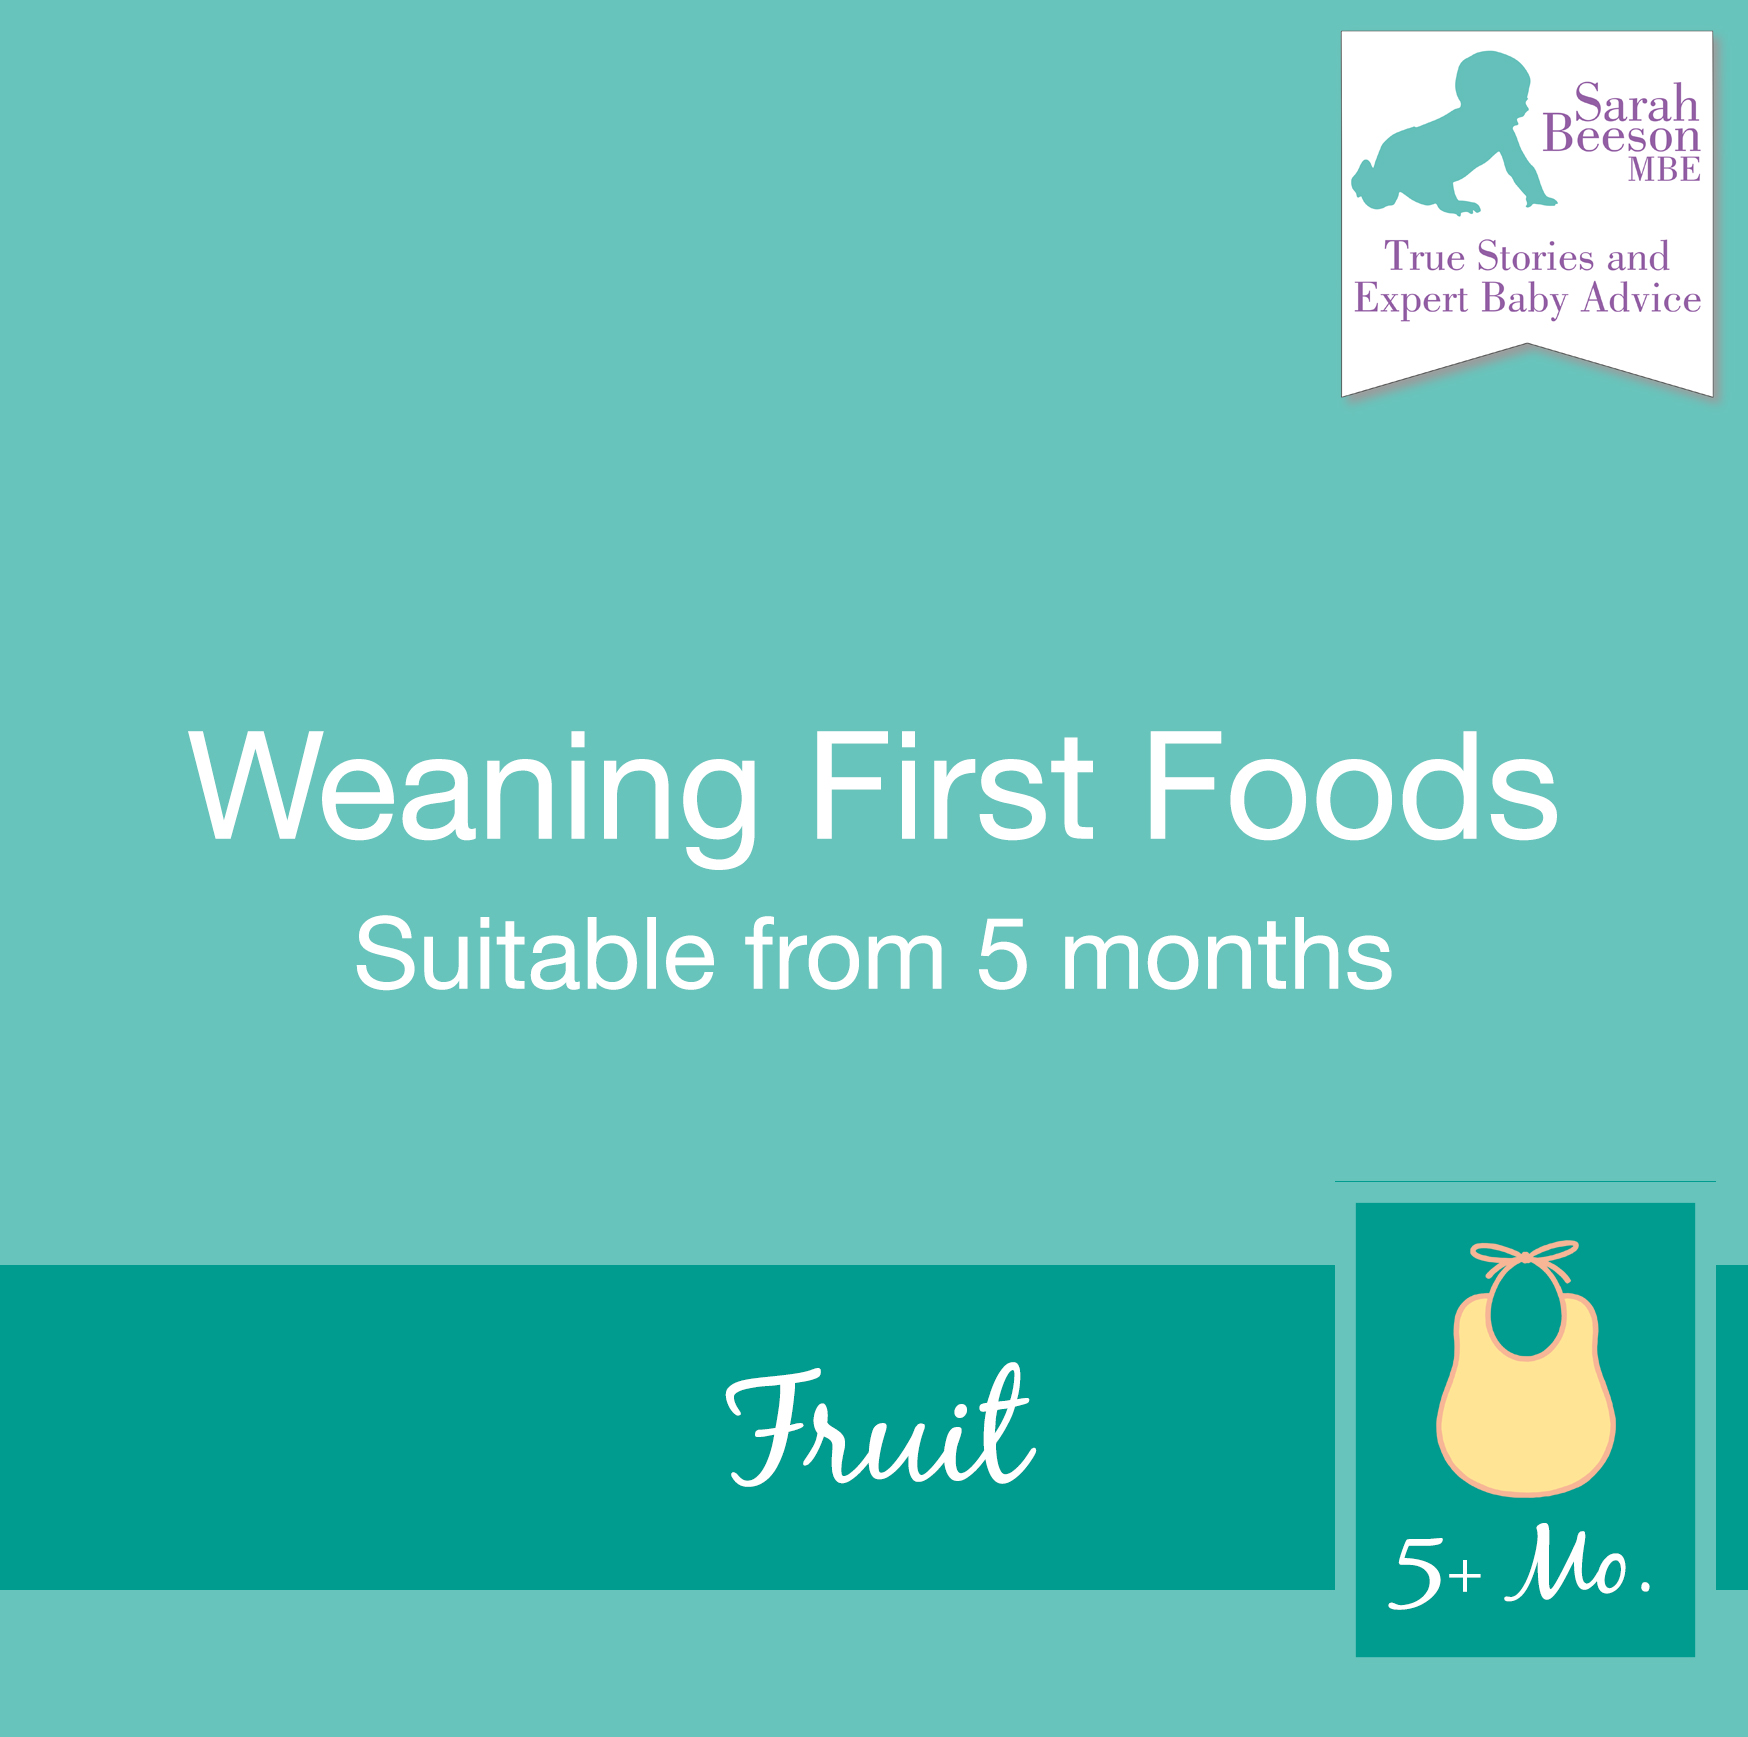 First Stage Weaning Suggestions – Fruit